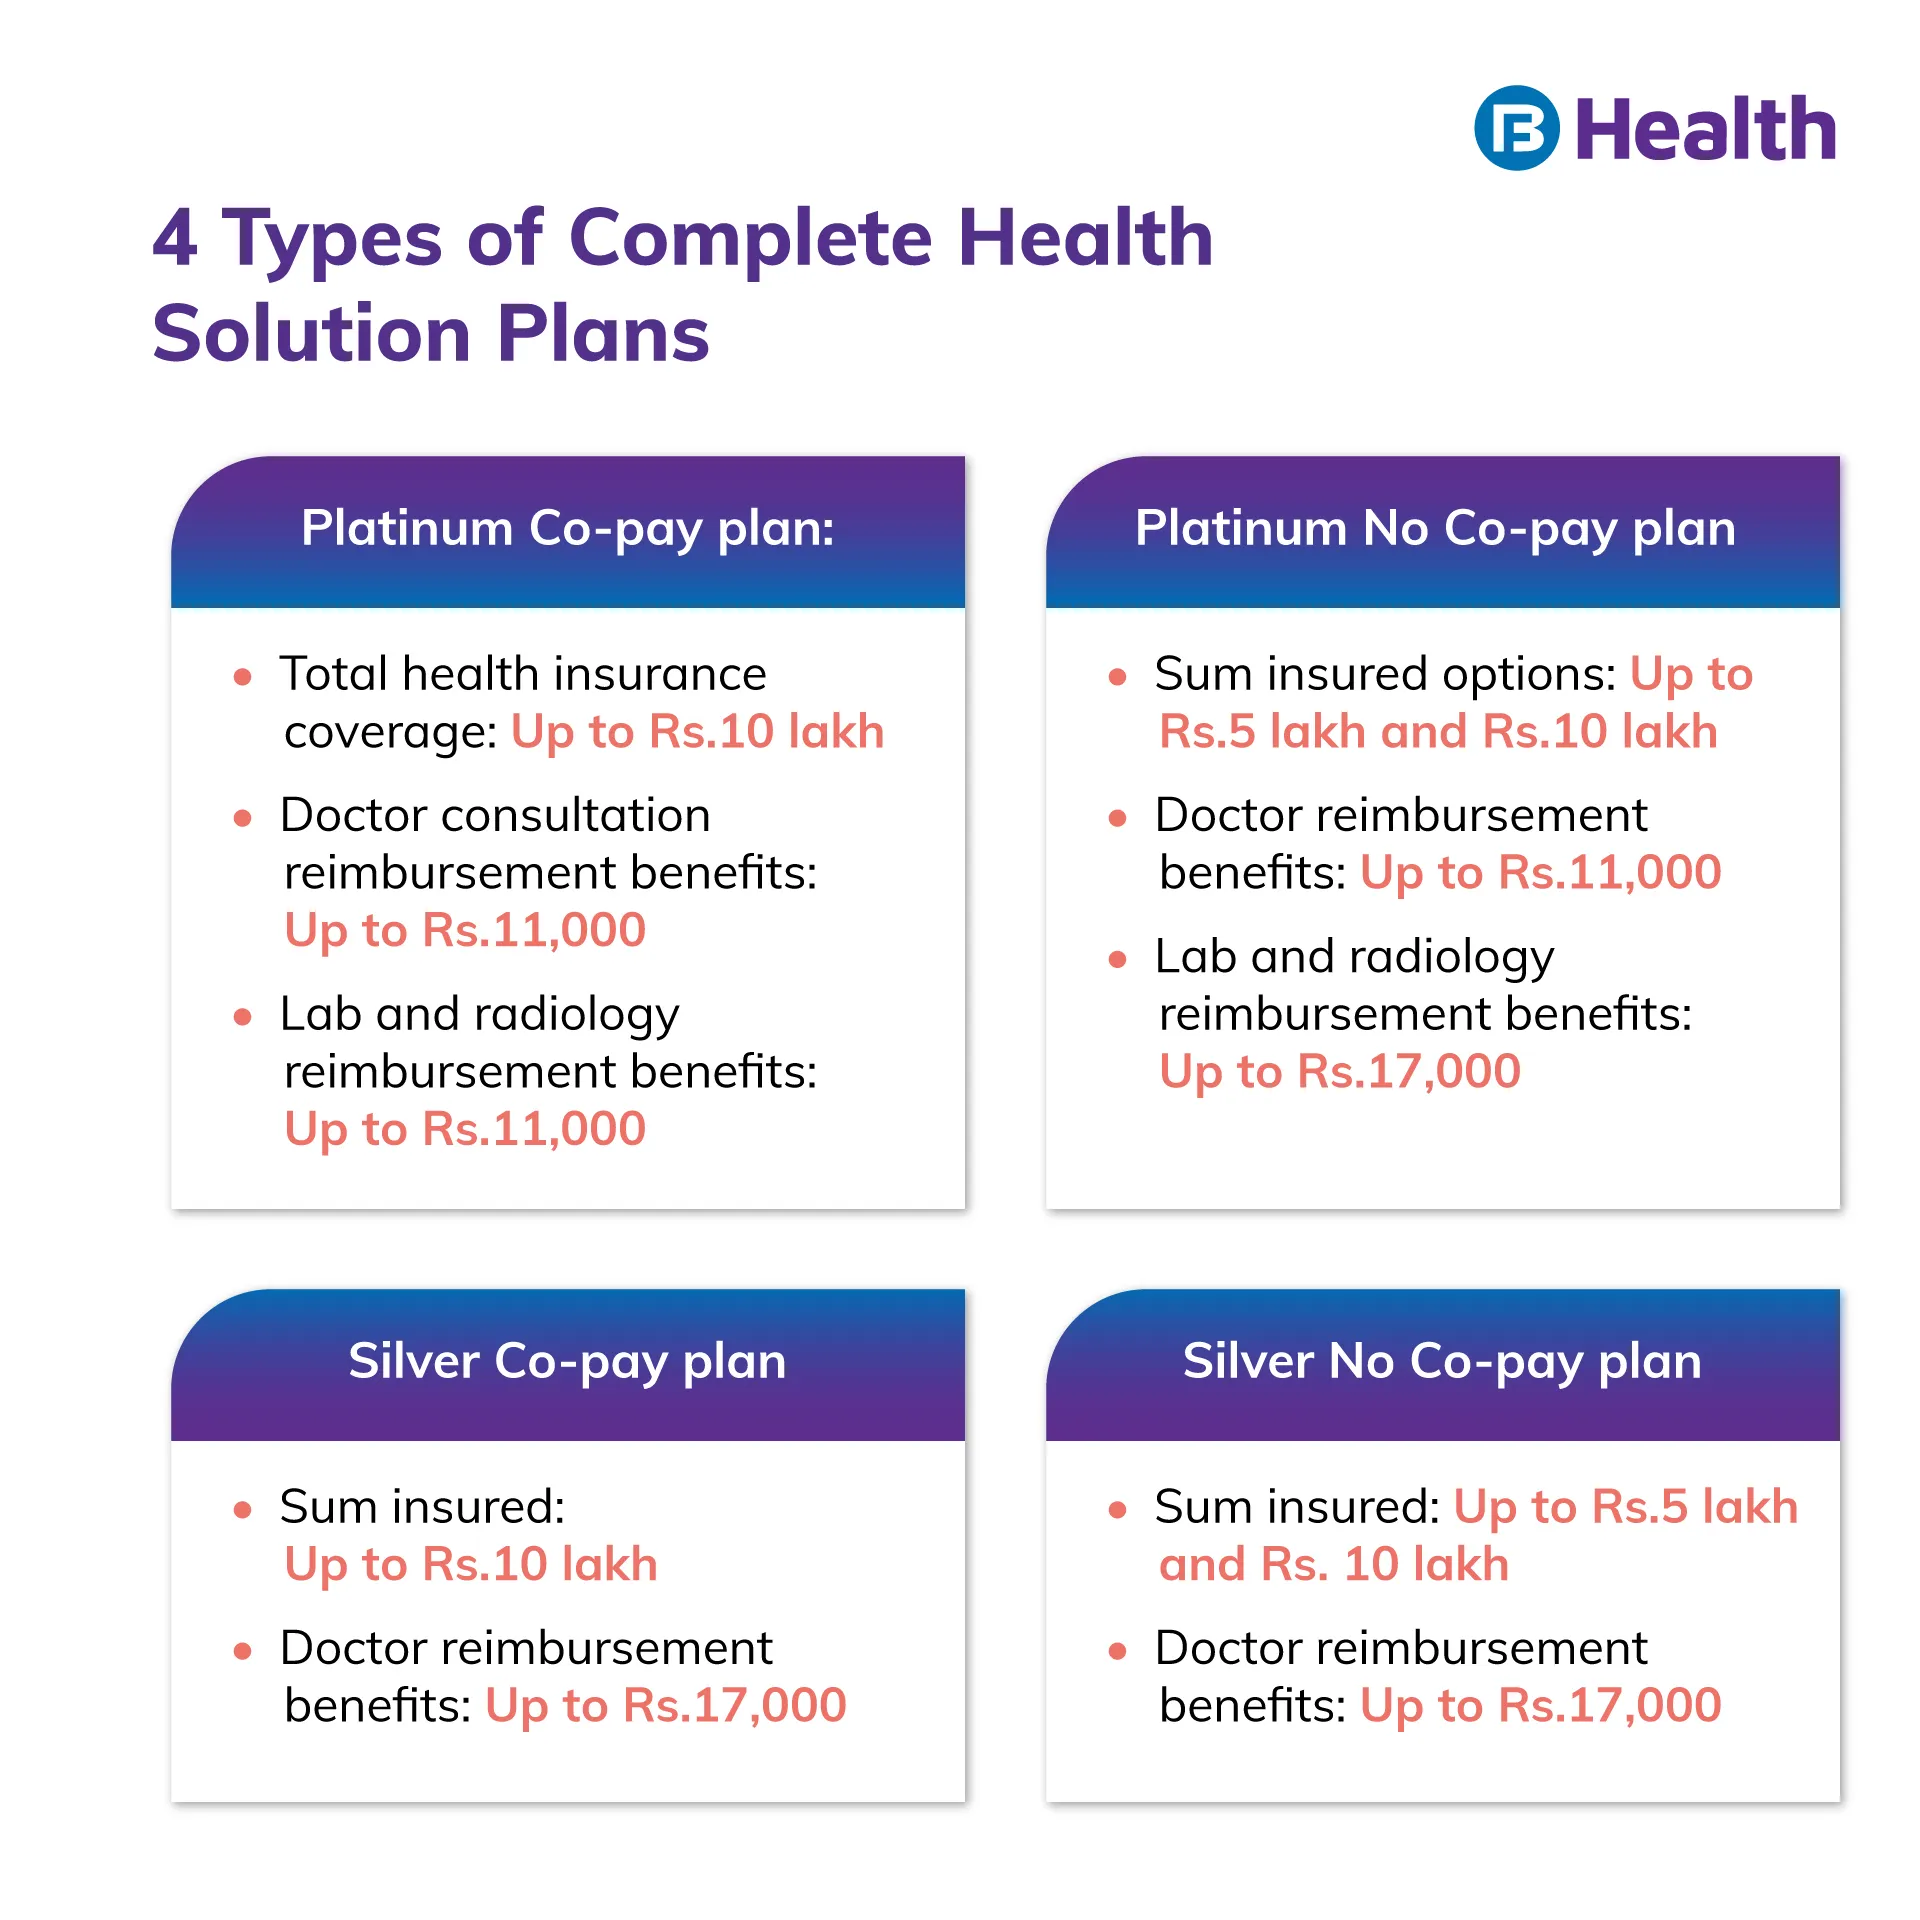 types of complete health solution plans